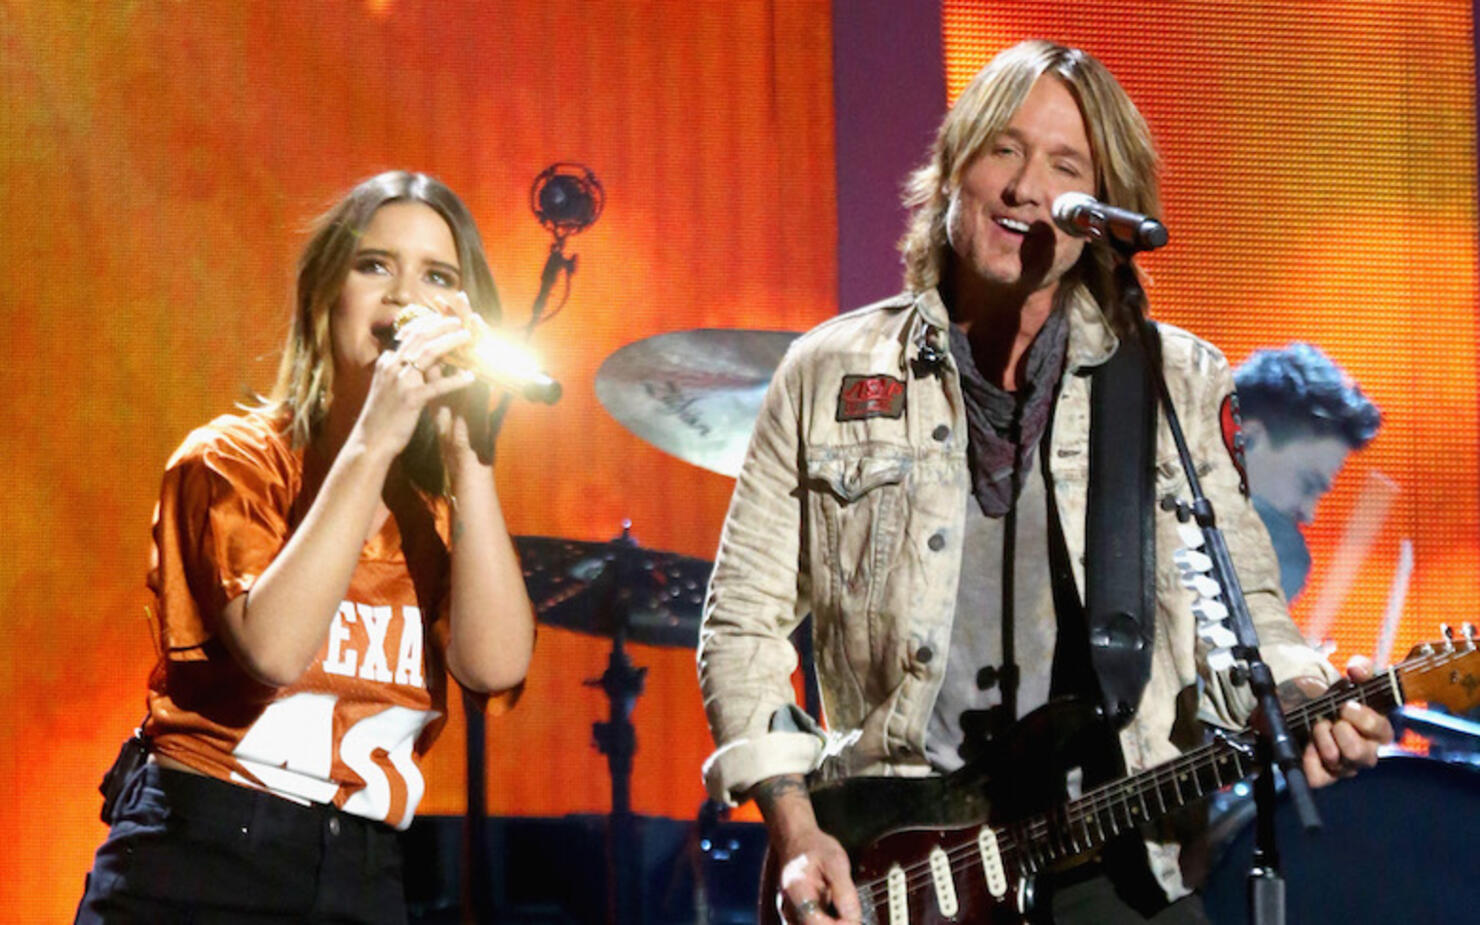 Maren Morris & Keith Urban perform live at the iHeartCountry Festival